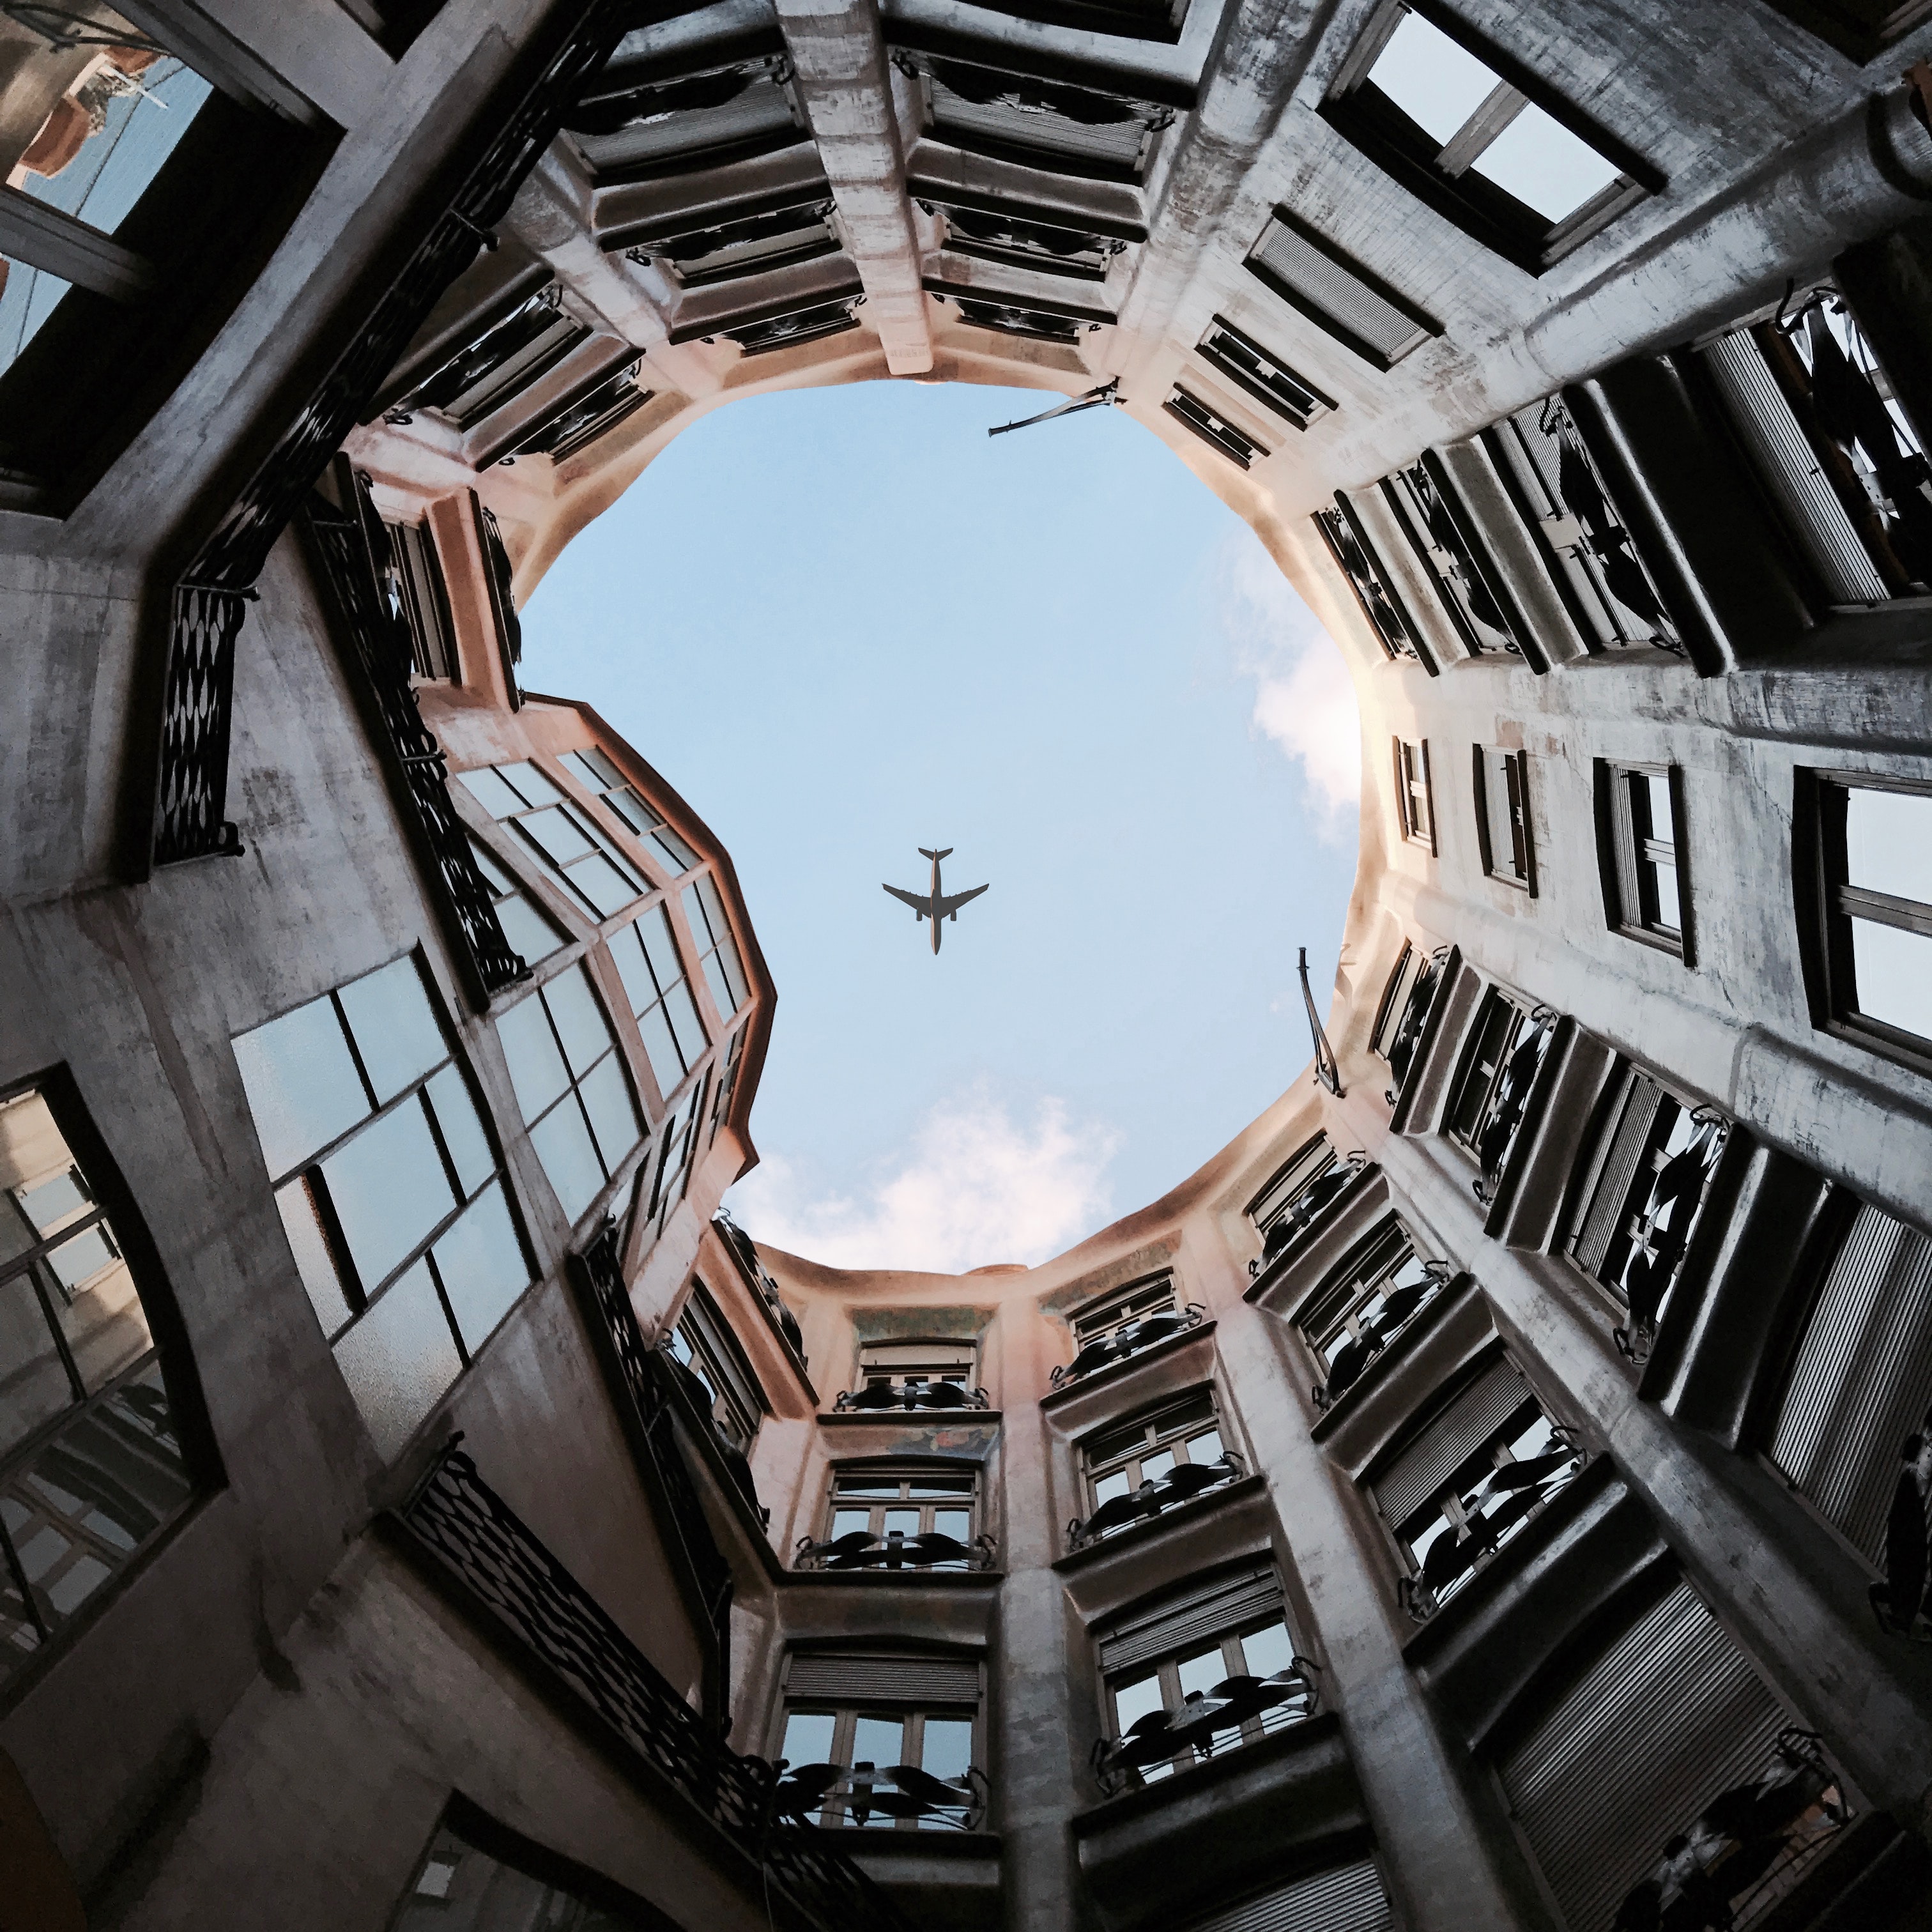 Free HD miscellanea, plane, sky, building, miscellaneous, height, airplane, bottom view